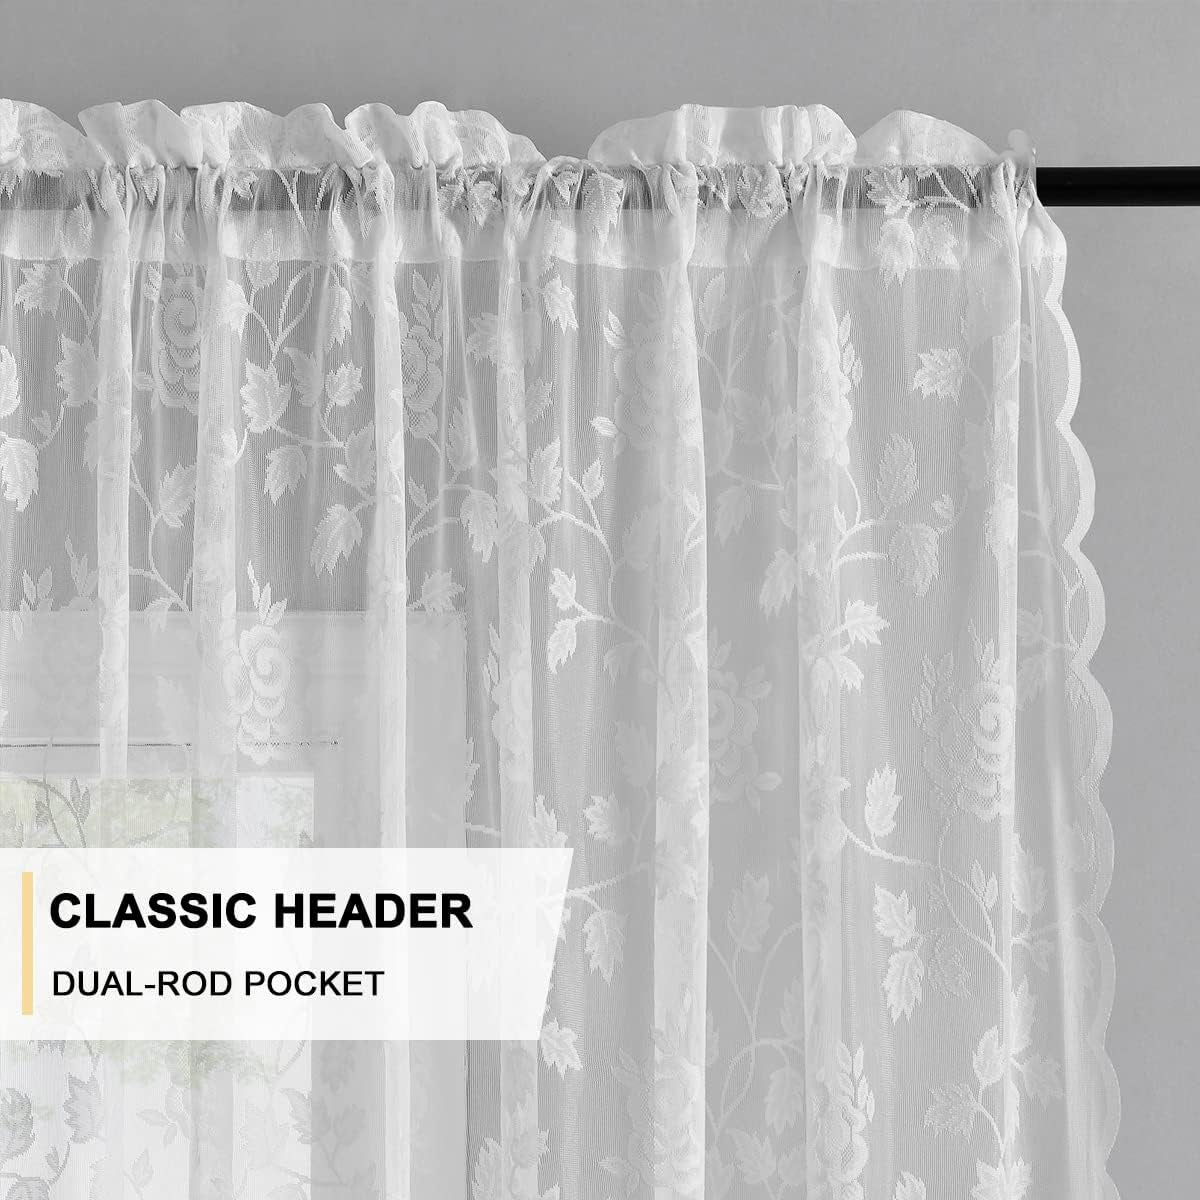 TERLYTEX White Lace Curtains 84 Inches Long, Country Vine Floral Embroidered Sheer Lace Curtains for Living Room, Privacy Scalloped Lace Sheer Curtains for Windows, 52 X 84 Inch, 2 Panels, White  TERLYTEX   